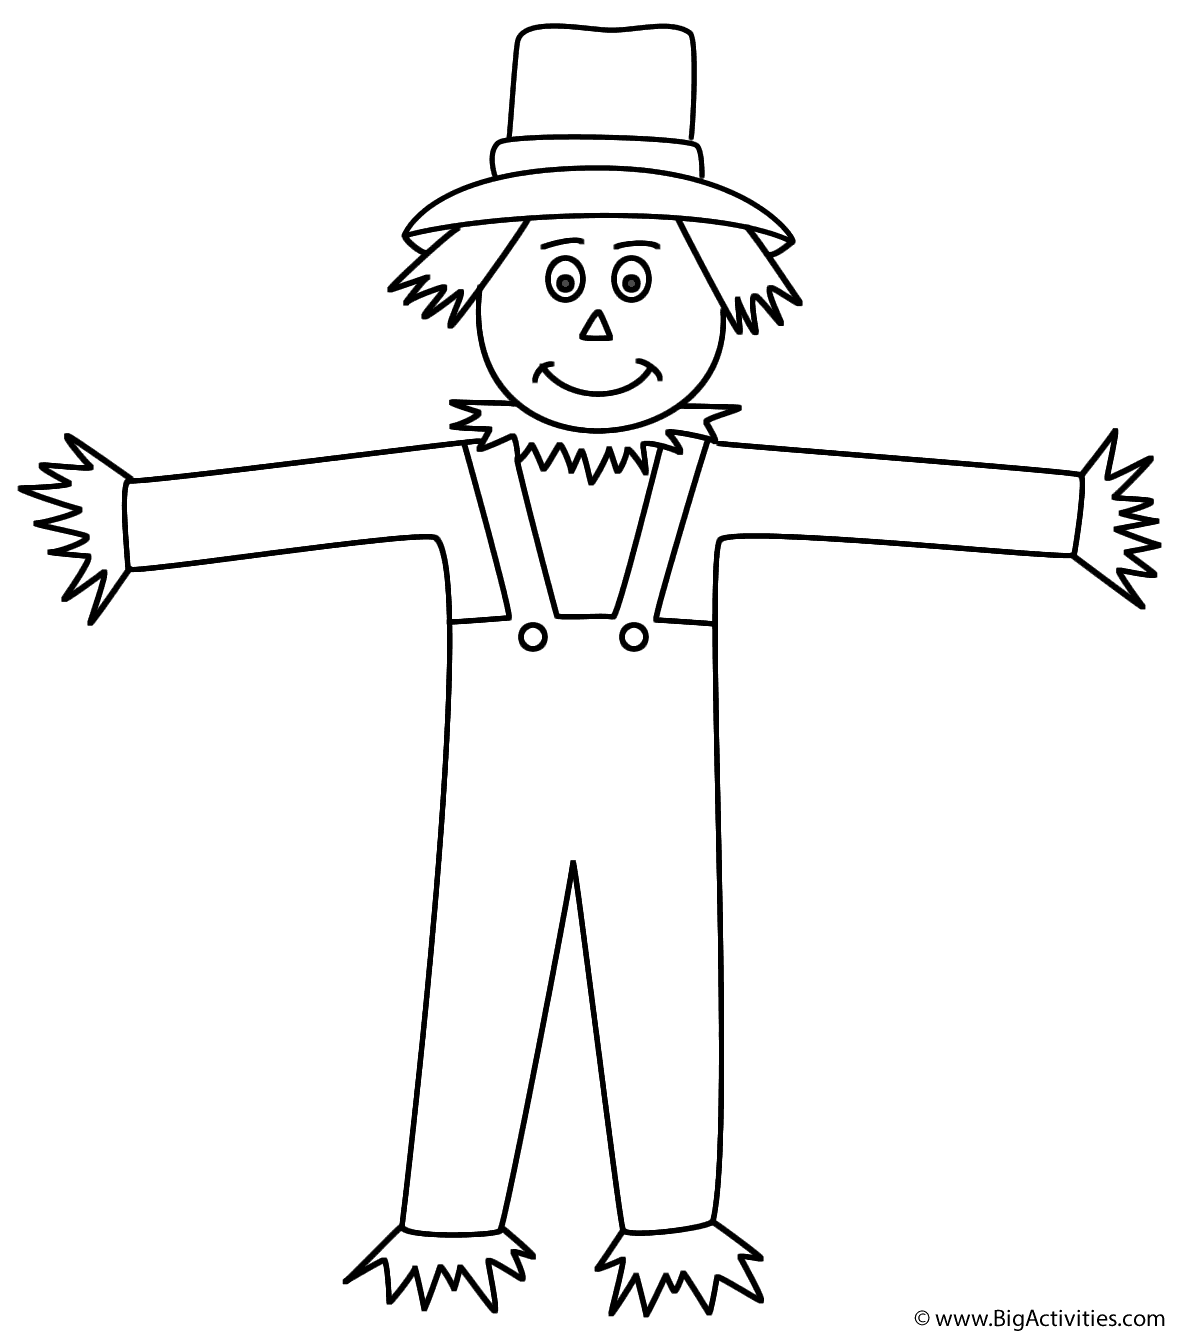 scarecrow-coloring-page-thanksgiving